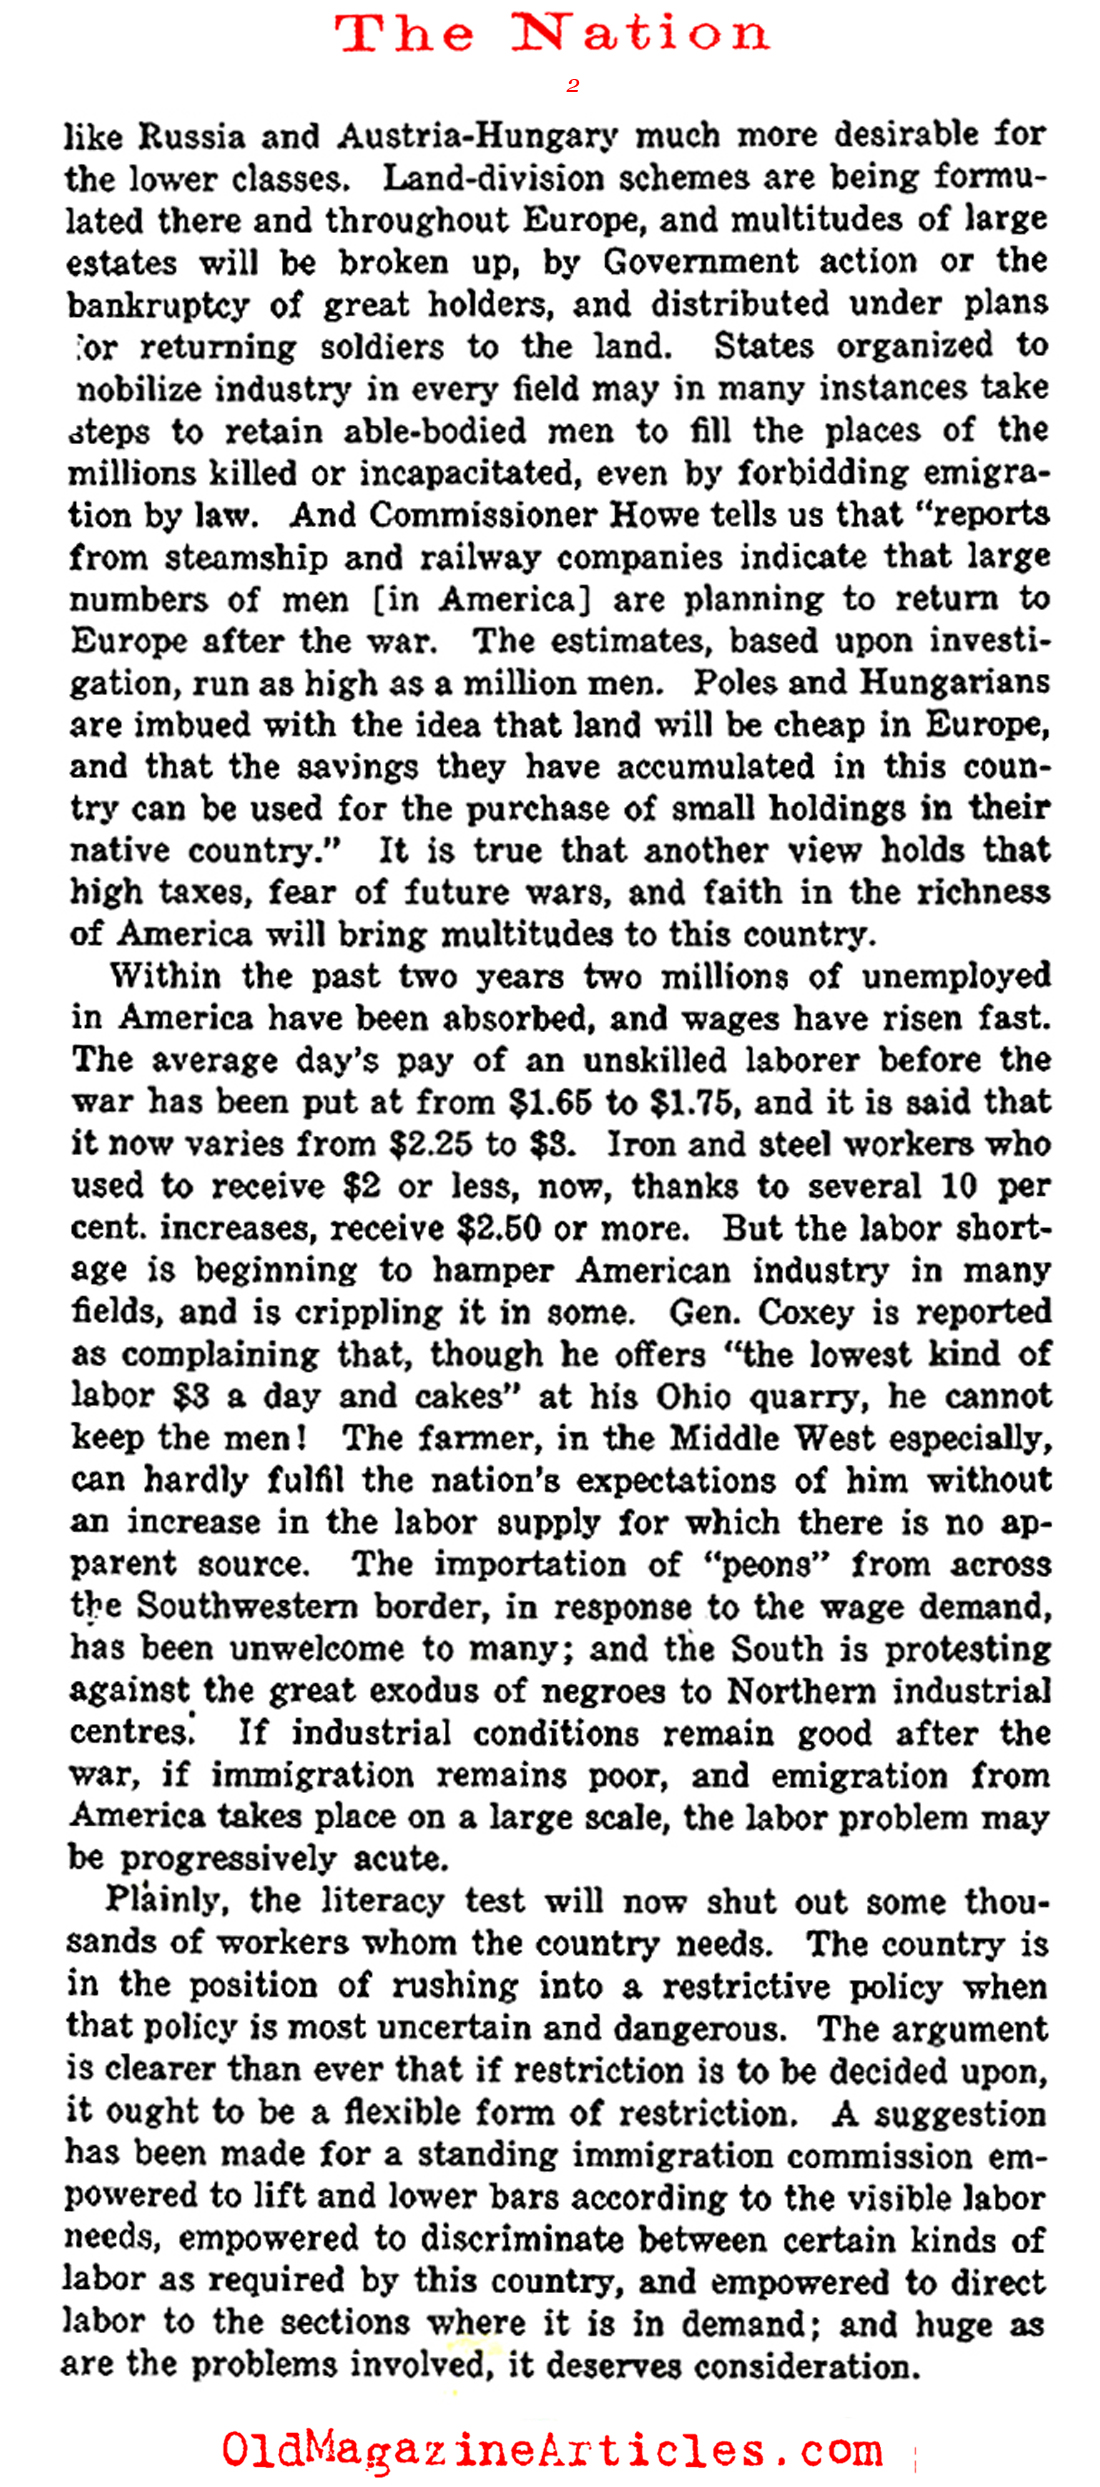 Immigration and Labor (The Nation, 1917)